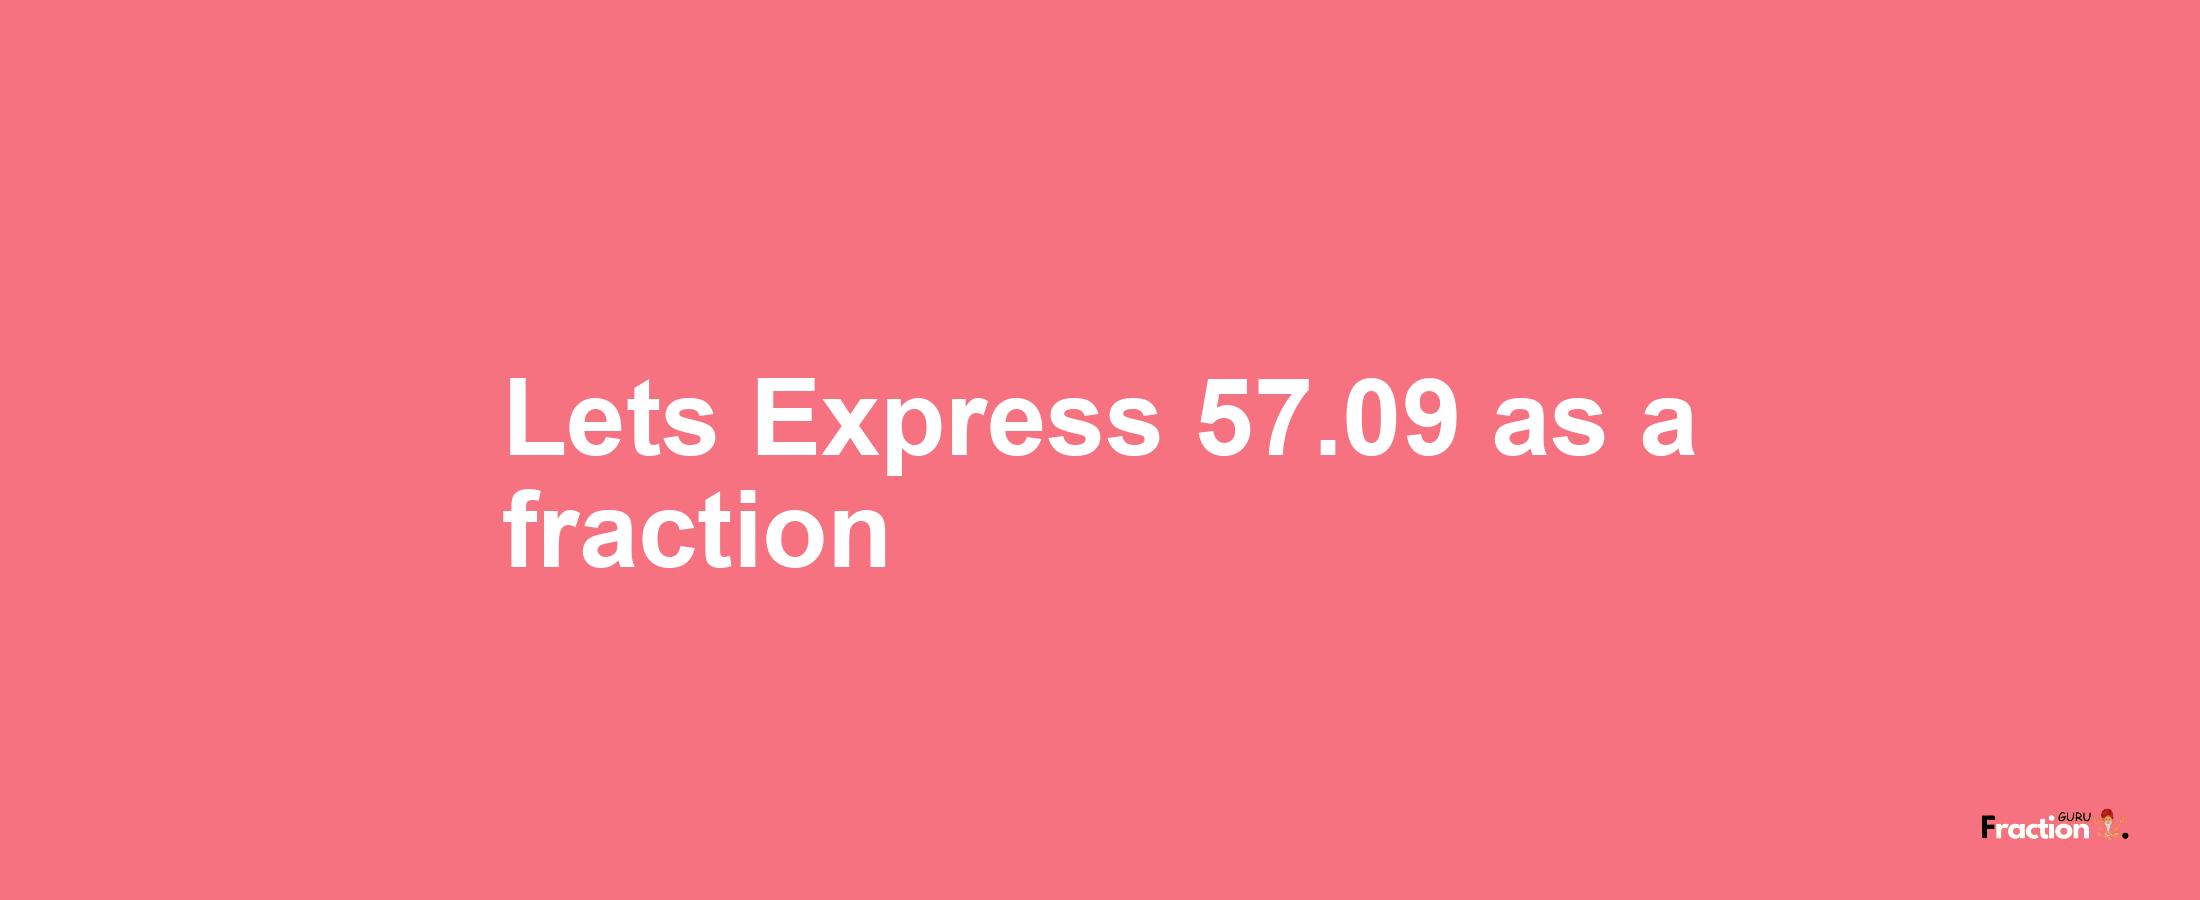 Lets Express 57.09 as afraction